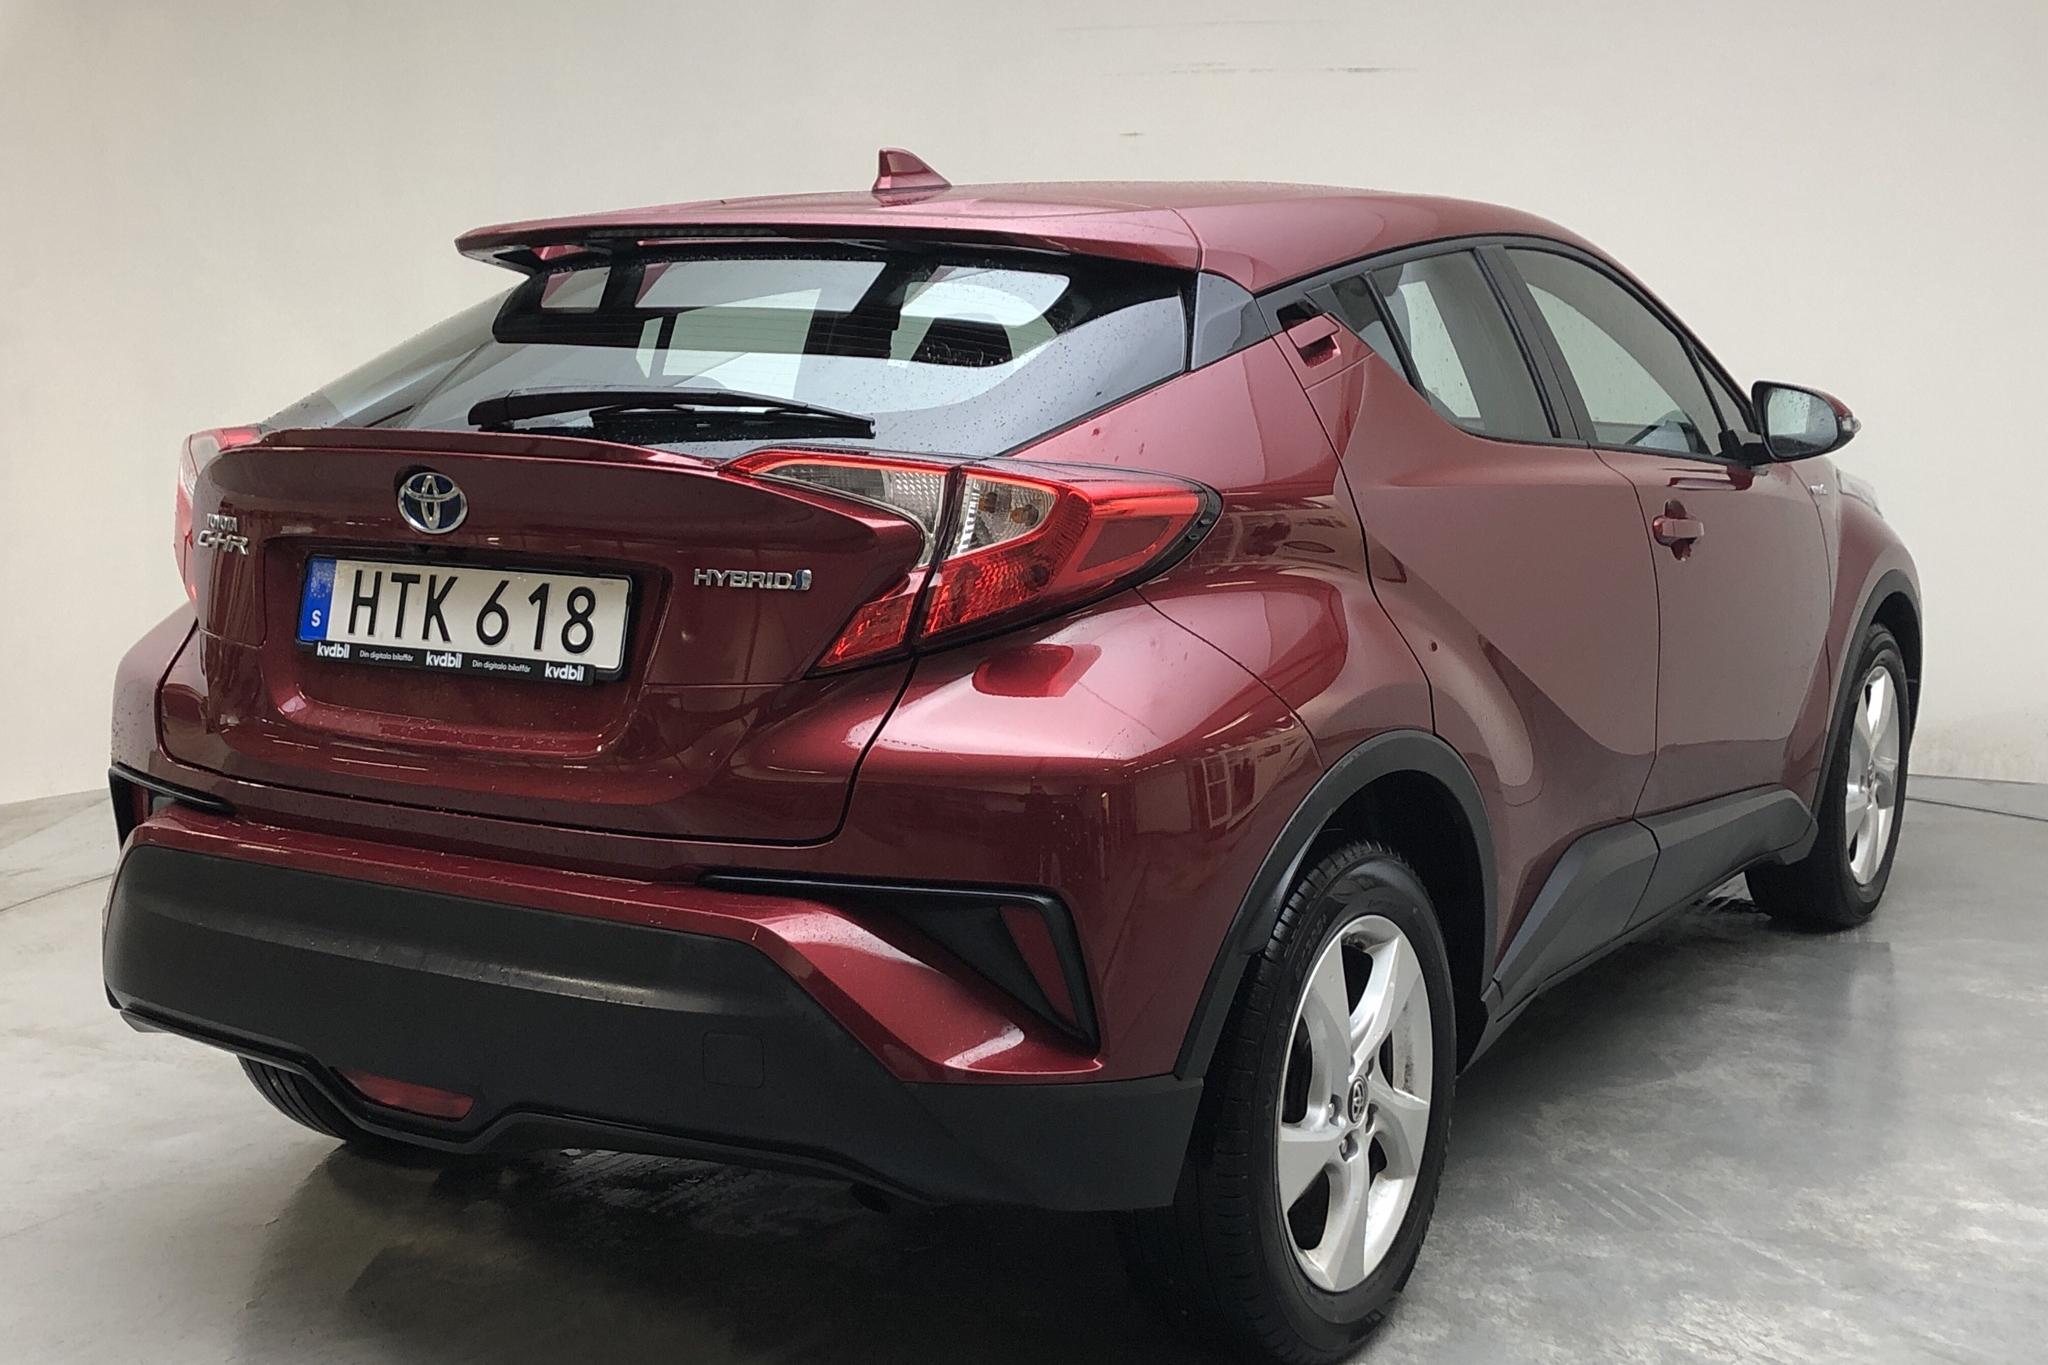 Toyota C-HR 1.8 HSD (122hk) - 90 820 km - Automatic - red - 2018